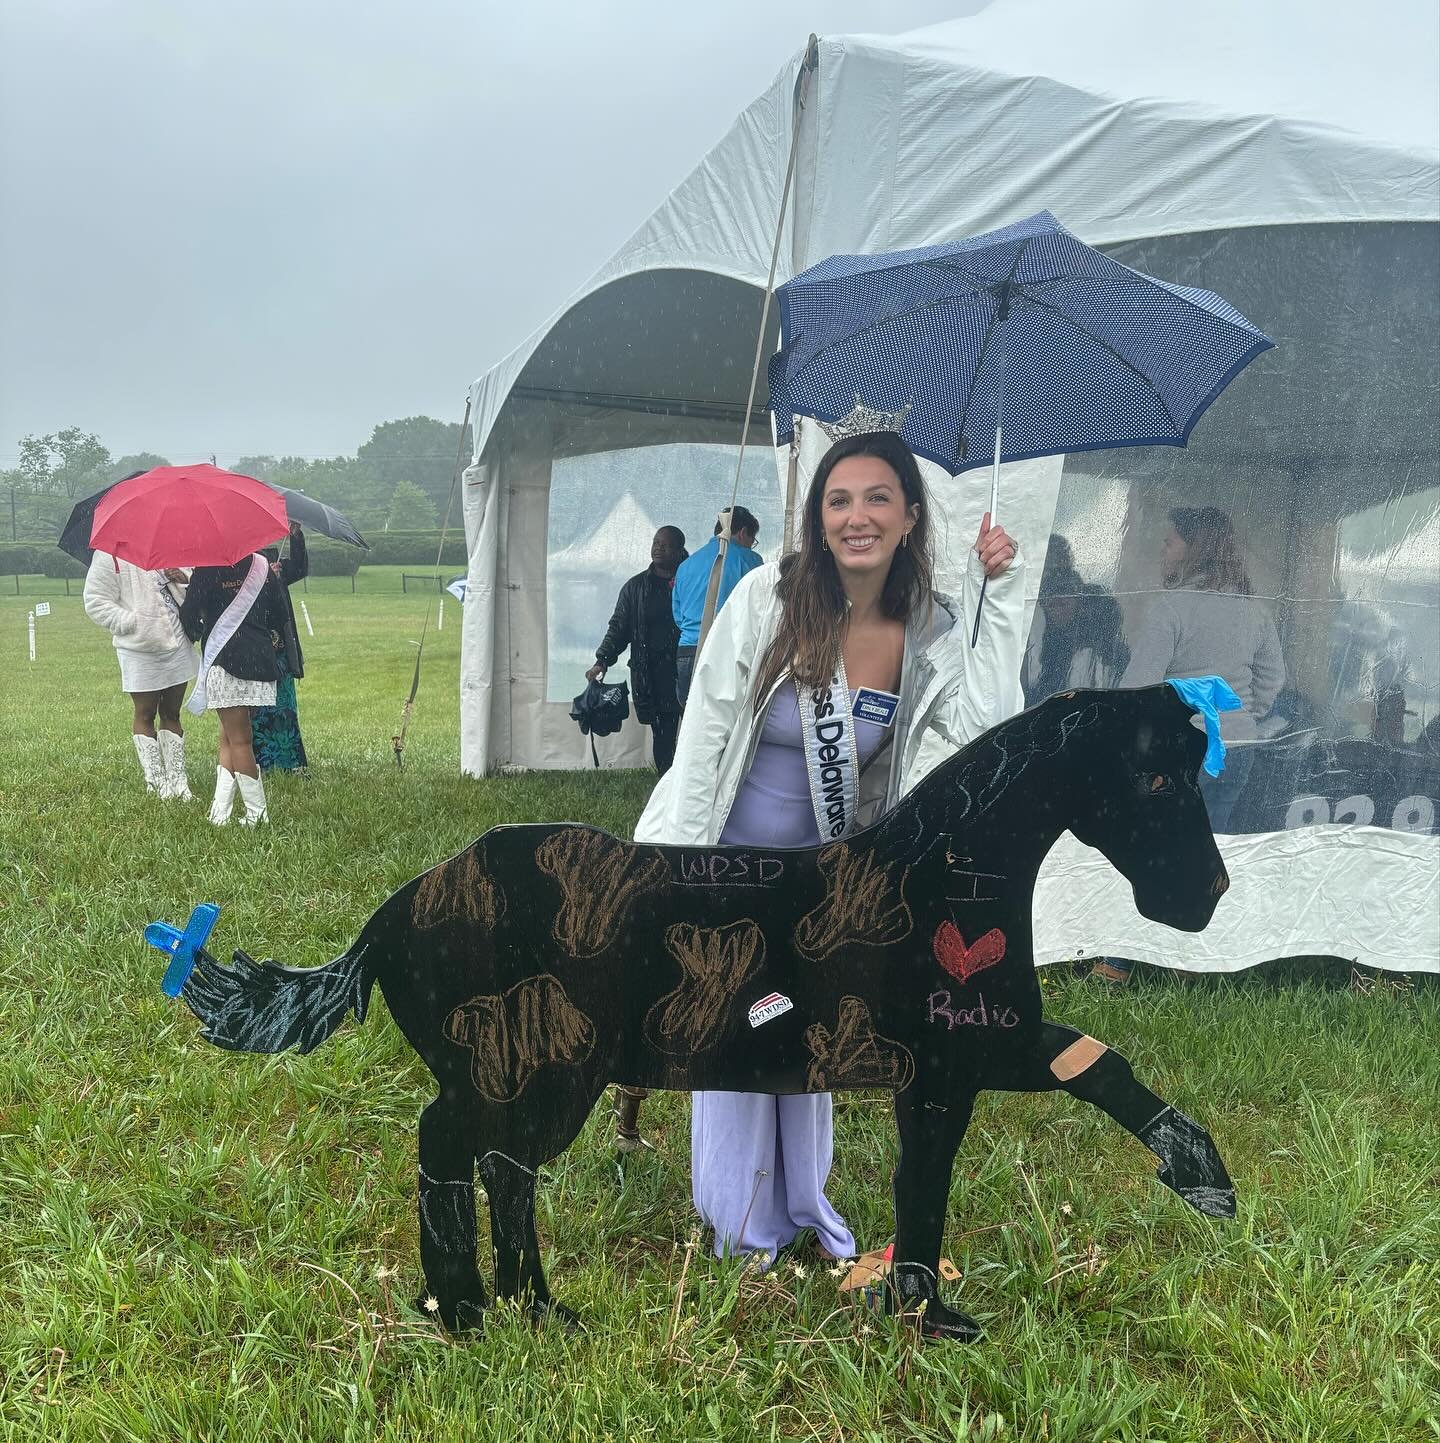 A little rain didn&rsquo;t stop us from having the best day at Point to Point!! 
From watching the ponies run, to the kids&rsquo; stick horse race, to seeing the dogs from the Brandywine SPCA, we had such a nice event with so many of our local titleh